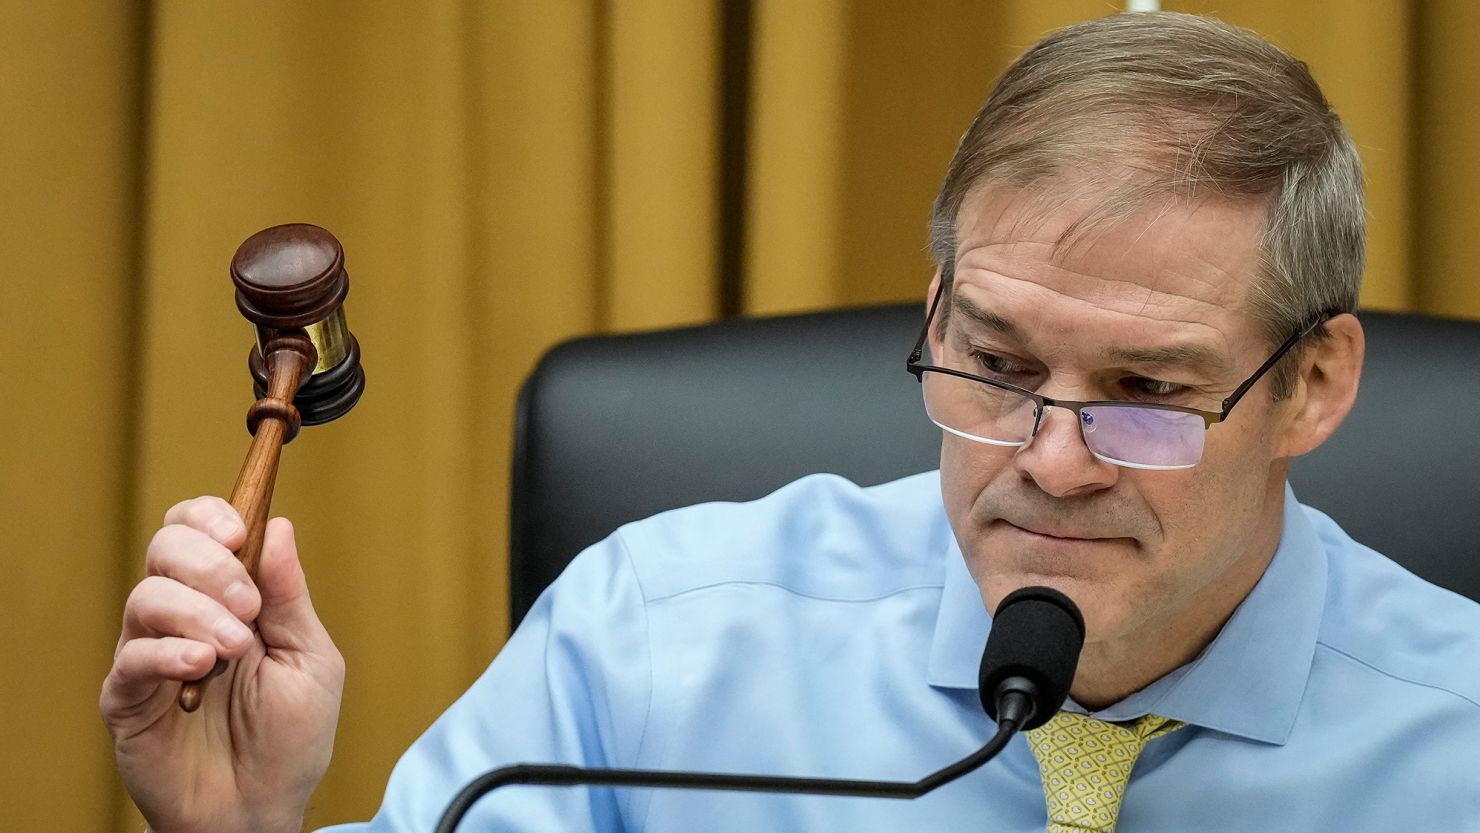 Rep. Jim Jordan (R-OH), Chairman of the House Judiciary Committee, strikes the gavel to start a hearing on the southern border security, February 01, 2023